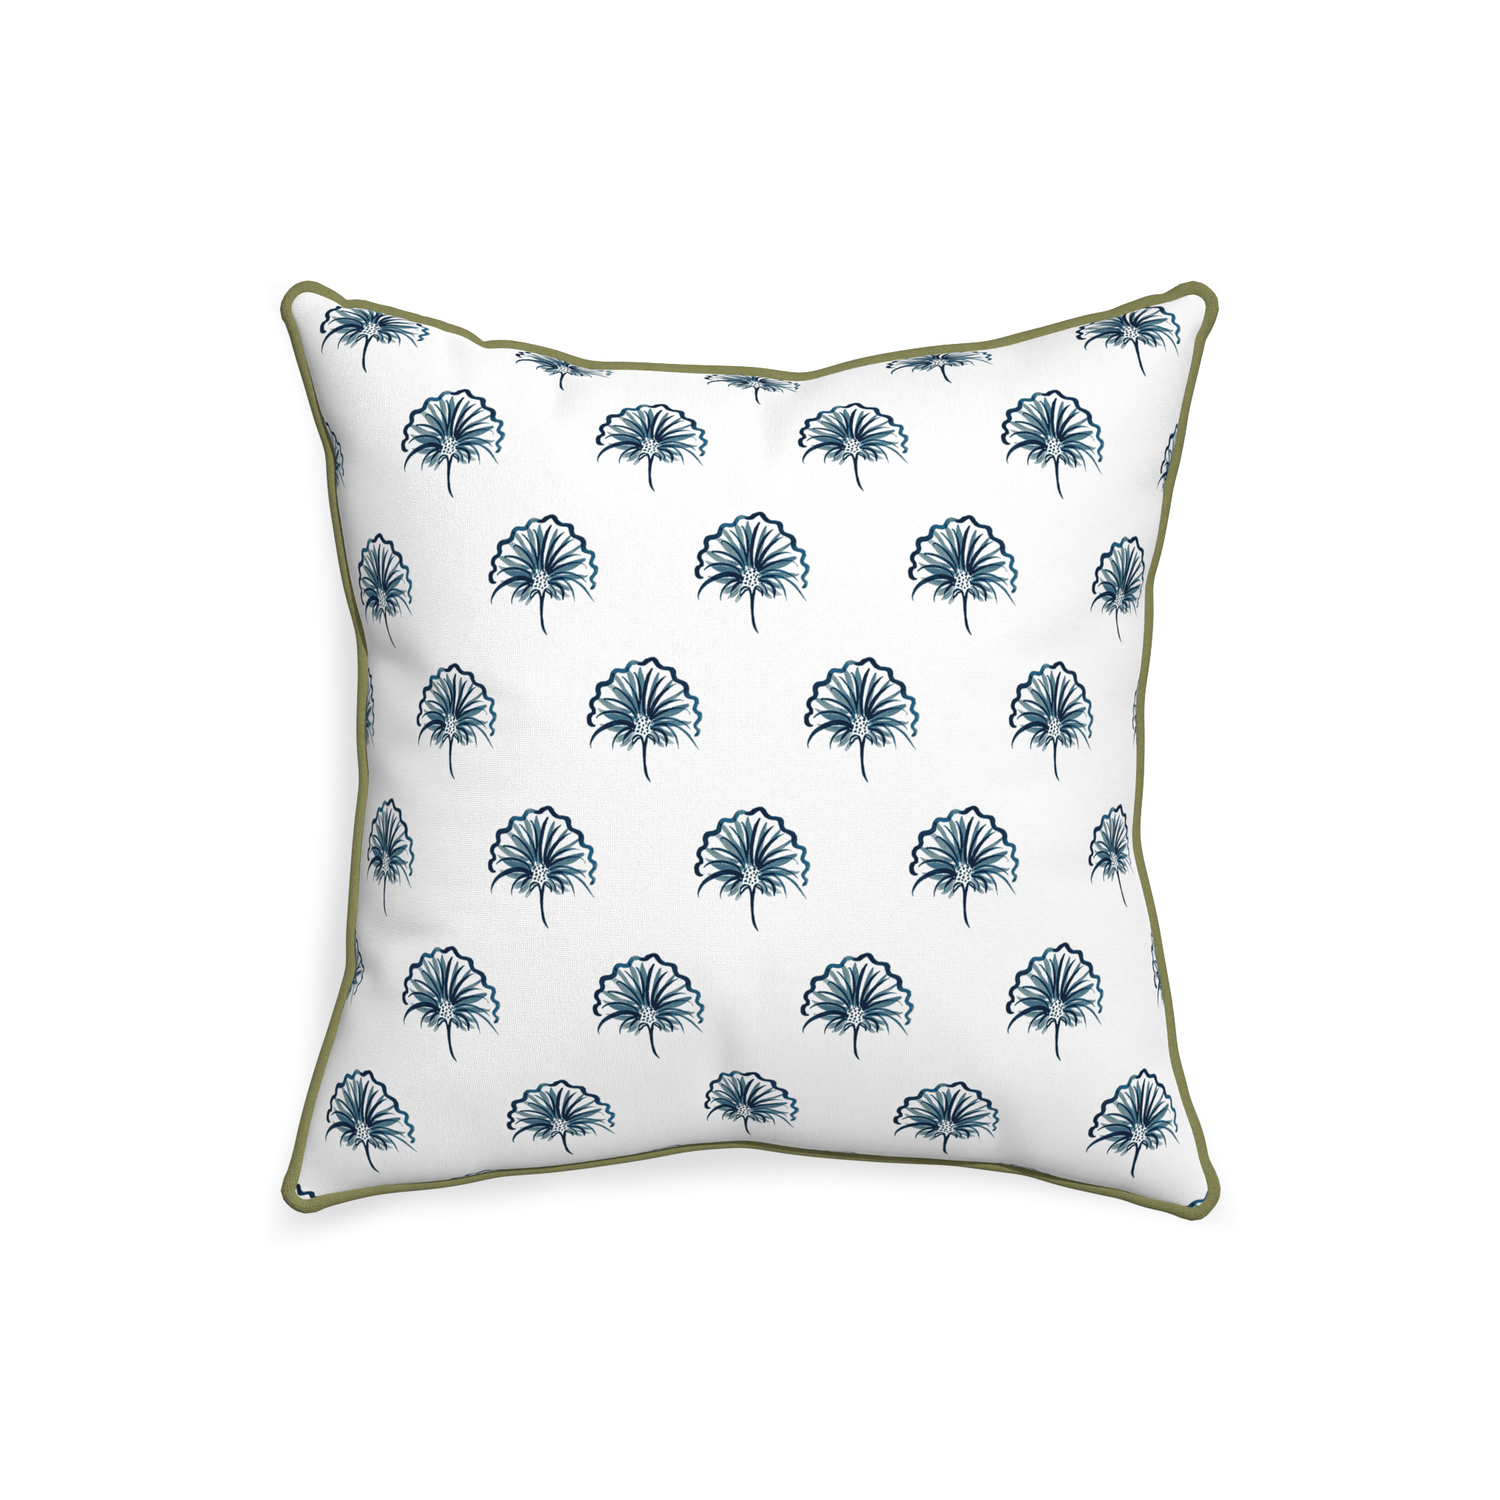 20-square penelope midnight custom floral navypillow with moss piping on white background